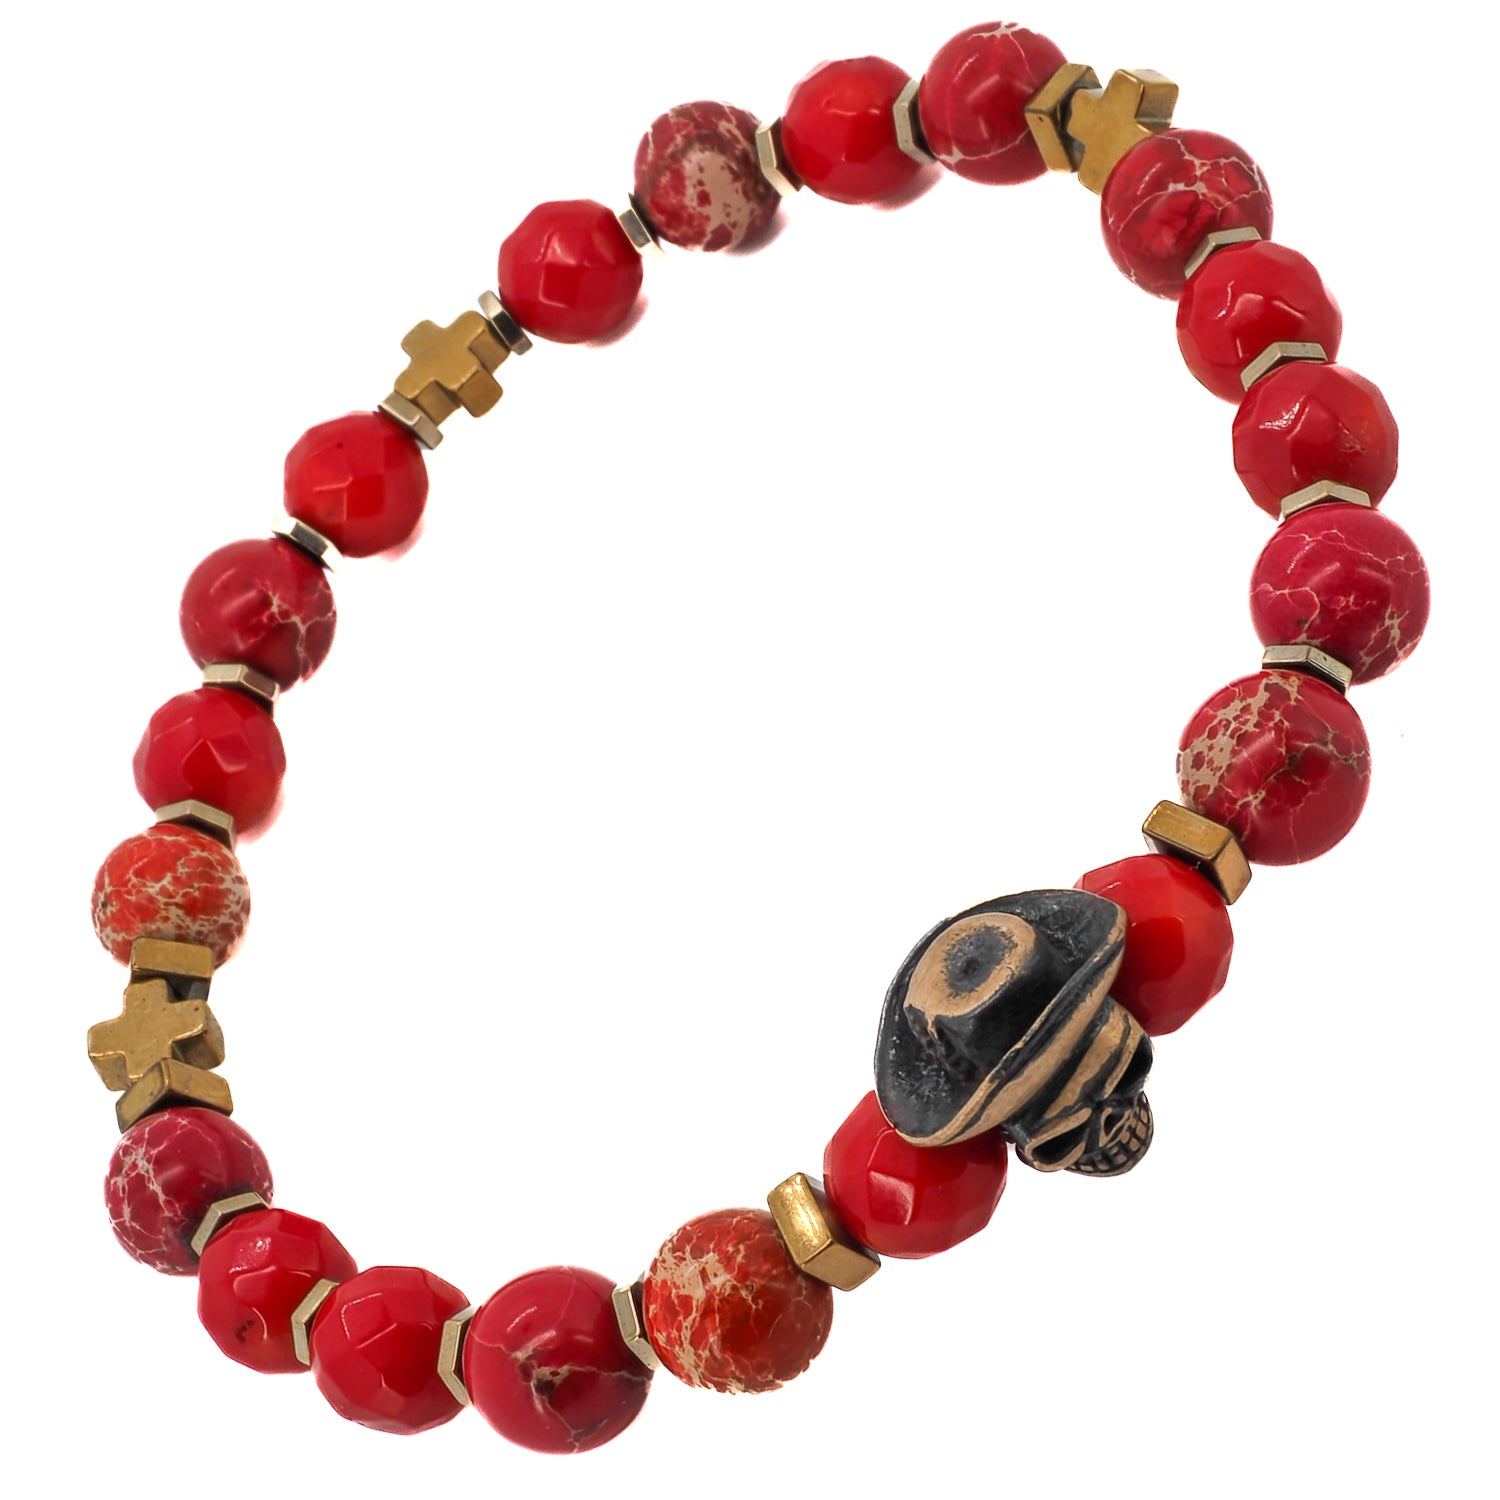 Energetic and Healing - Red Coral Stone Beads.